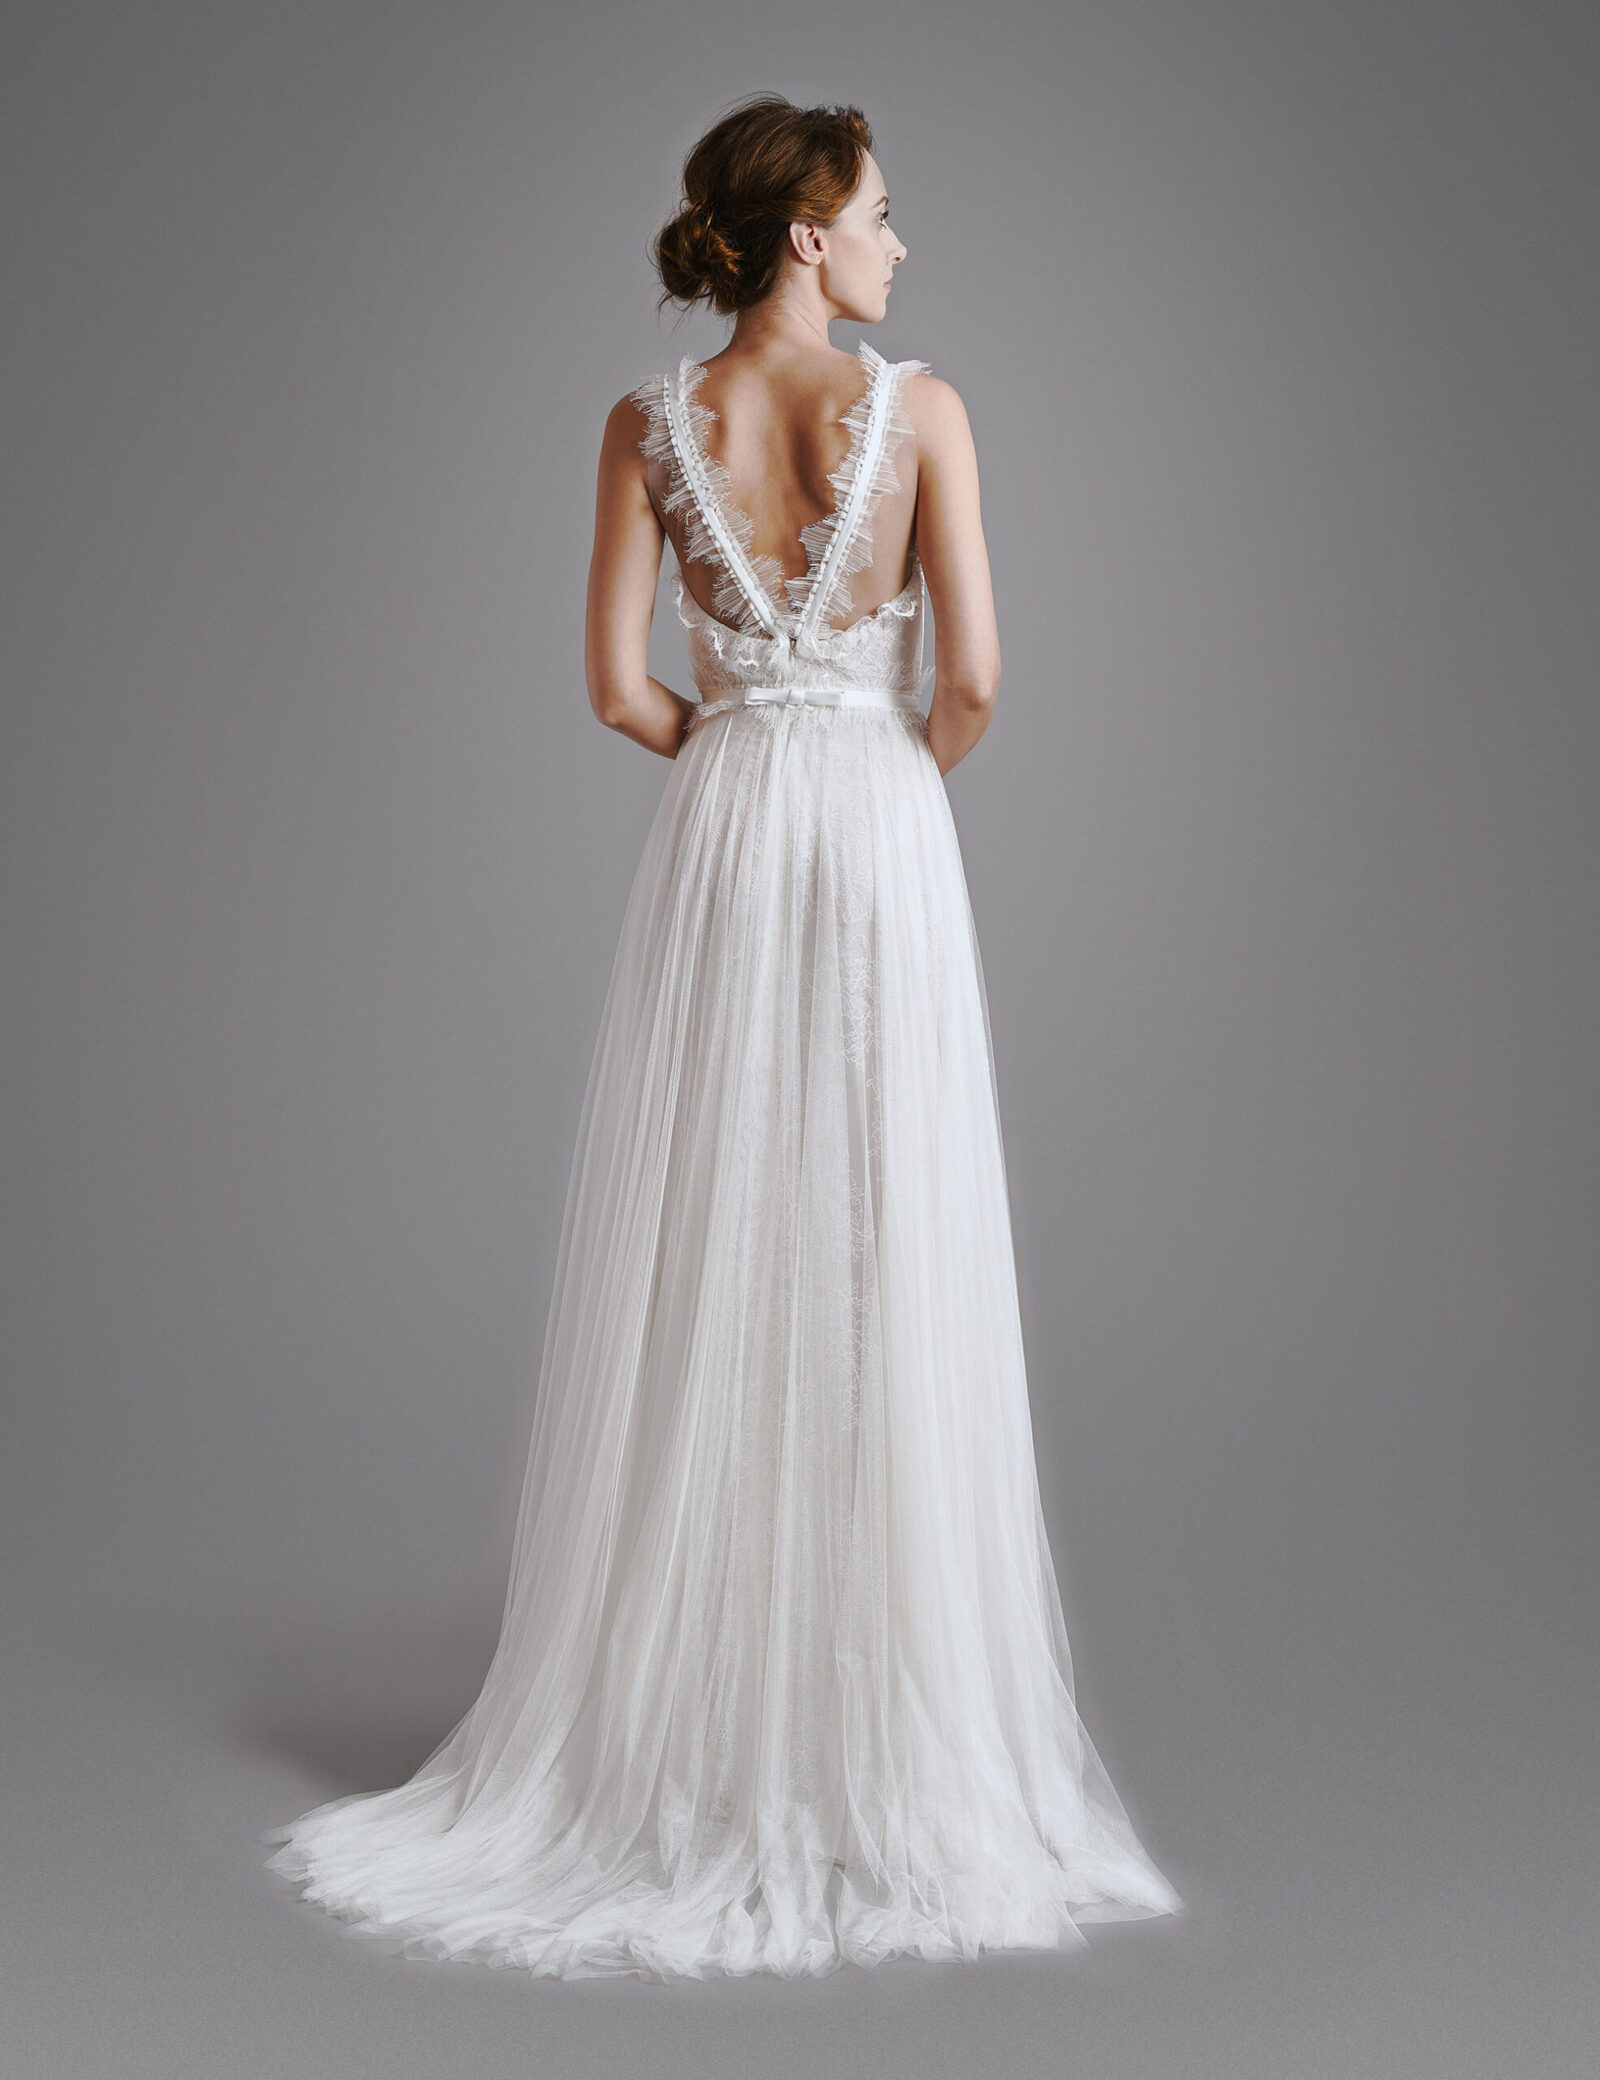 Romantic wedding dress WILLOW BUTERFLY BHARB-WILLOW-BUTTERFLY-BH2020-0005-005-tall